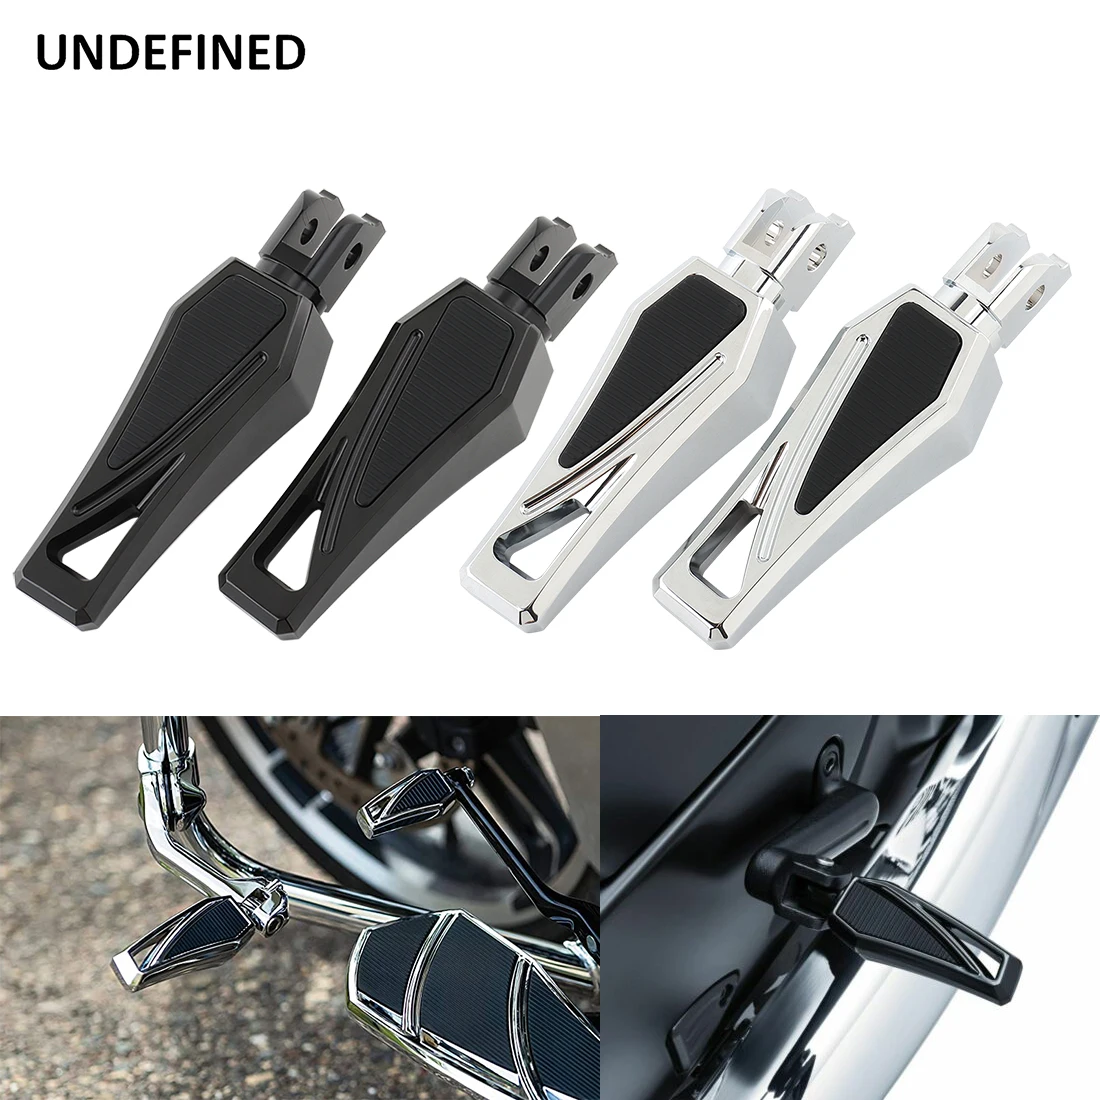 

Phantom Foot Pegs Footrest Front Rear Pedals for Harley Softail 2018-2023 Fat Boy Street Bob Low Rider Breakout Slim Deluxe